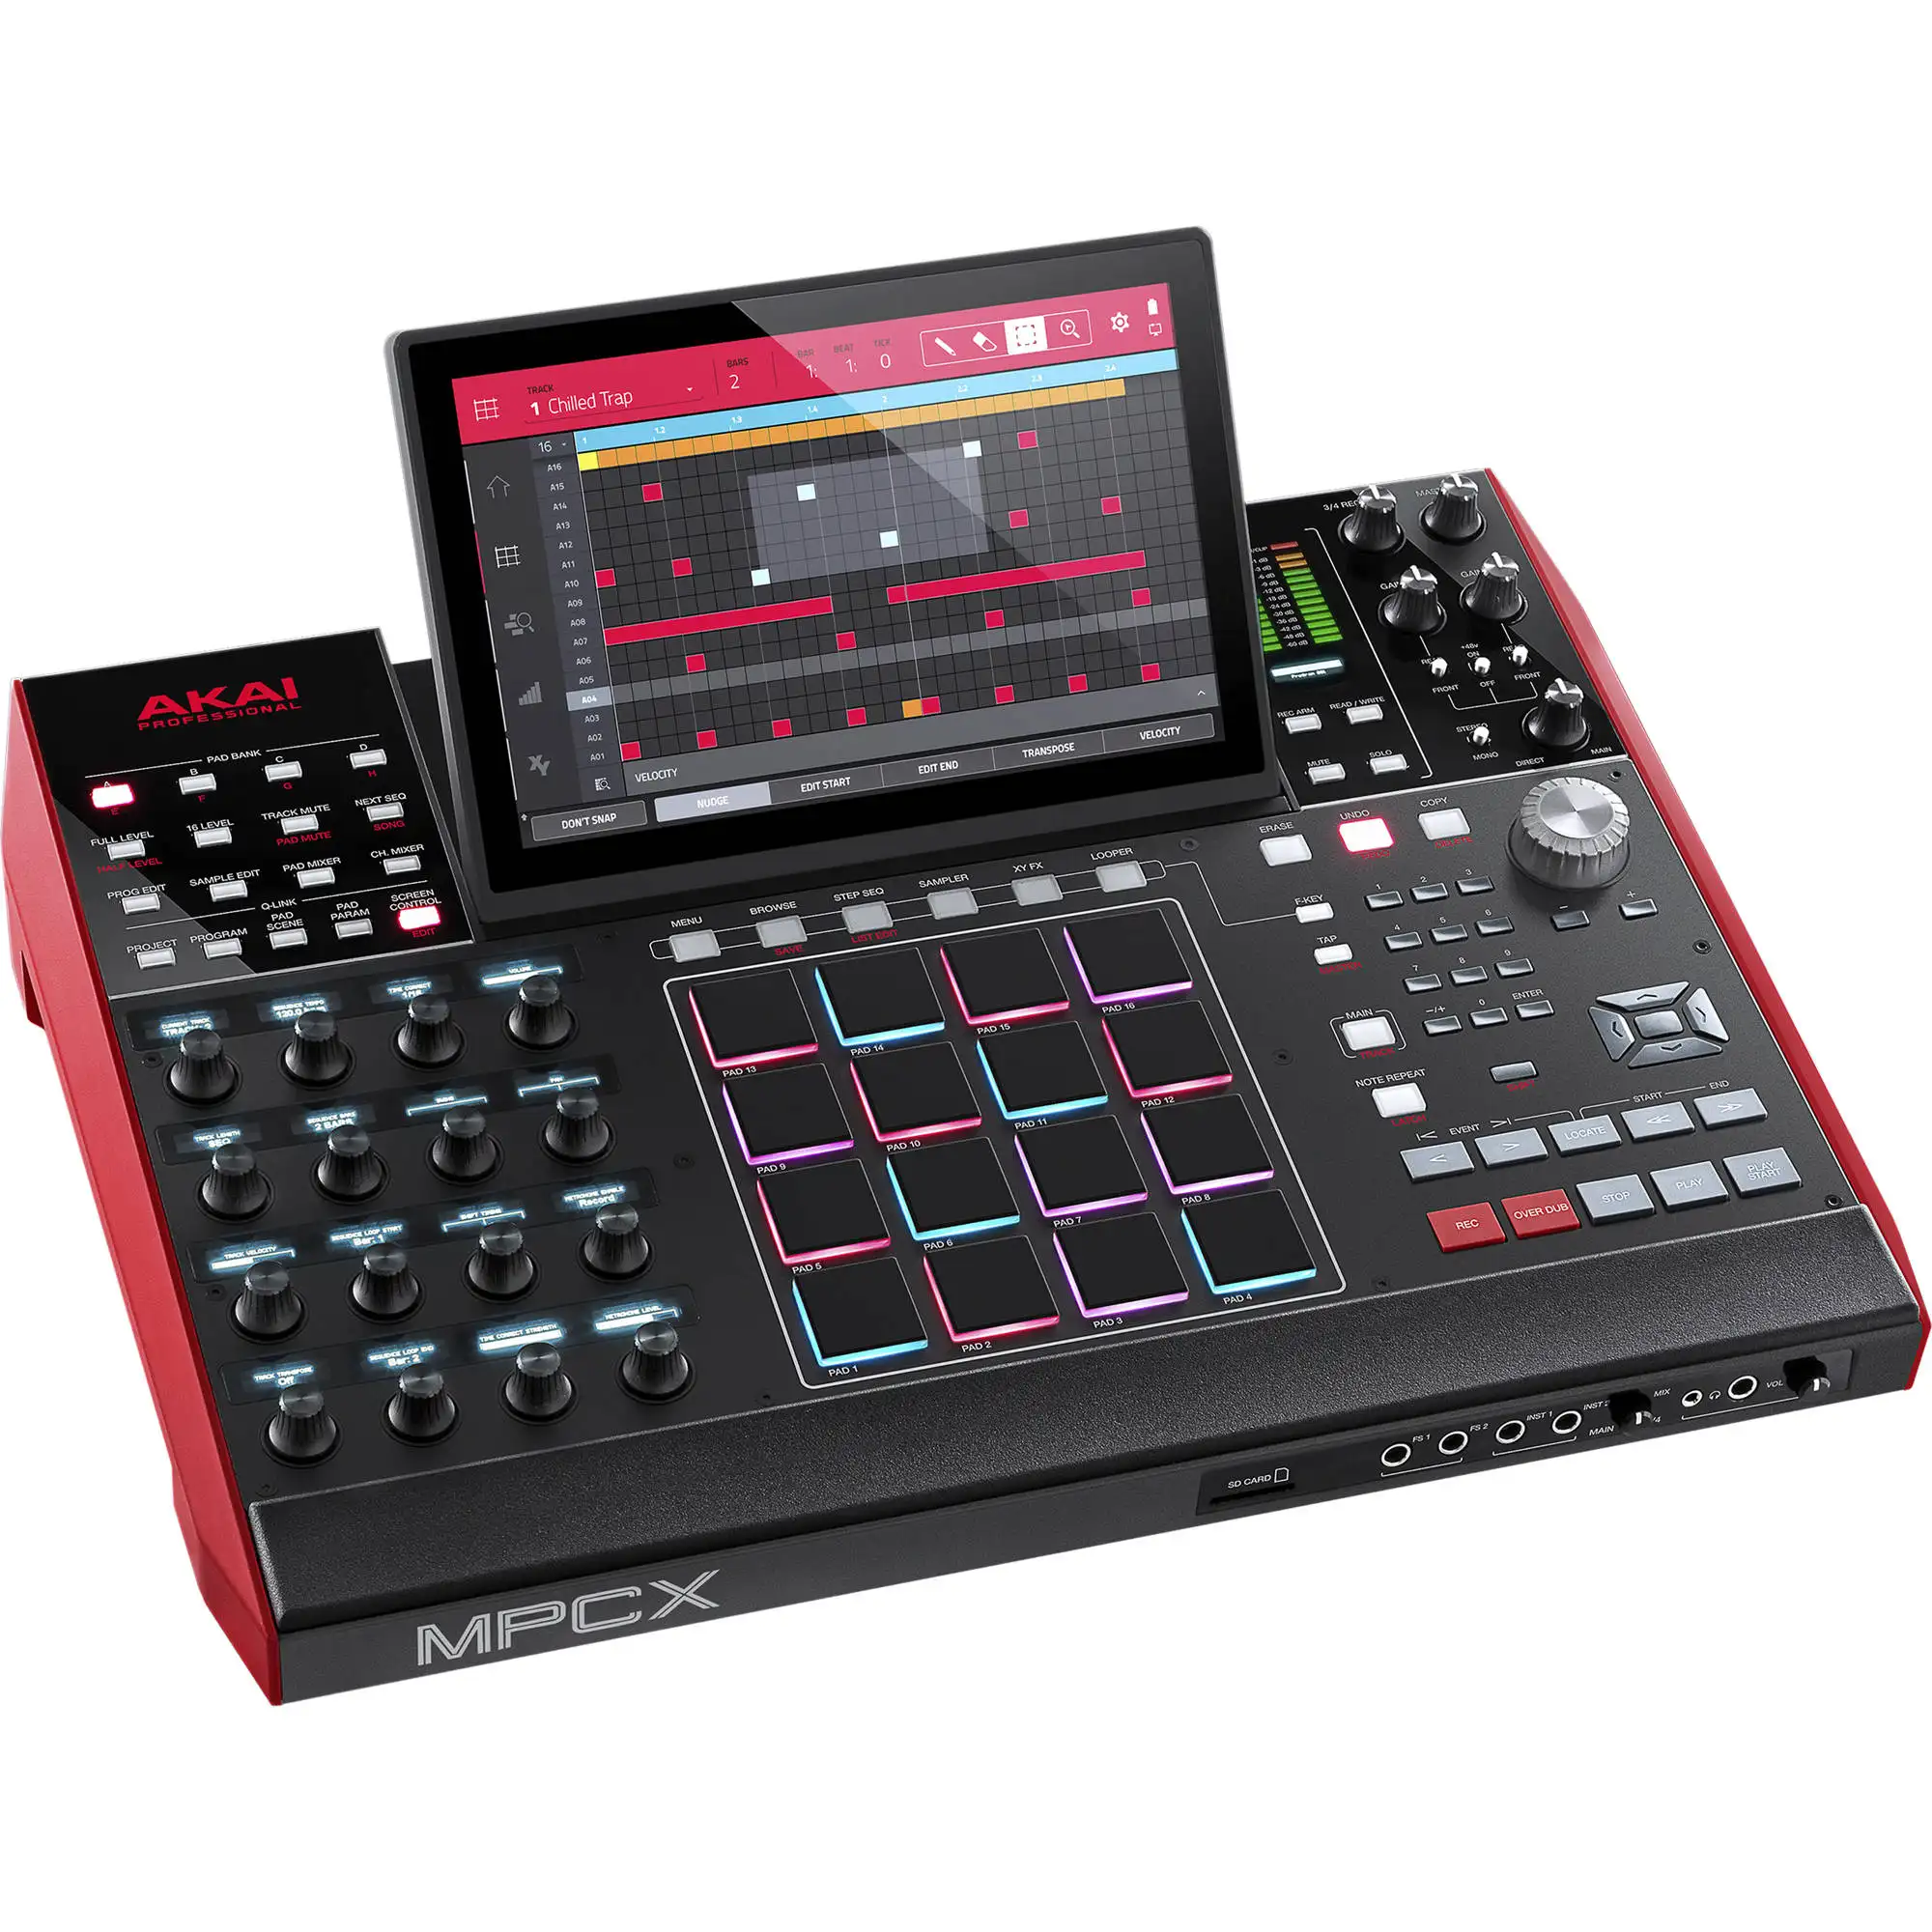 Aver Discounted AKAI Professional MPC X Standalone Drum Machine and Sampler With 10.1-inch display, Pads, Synth